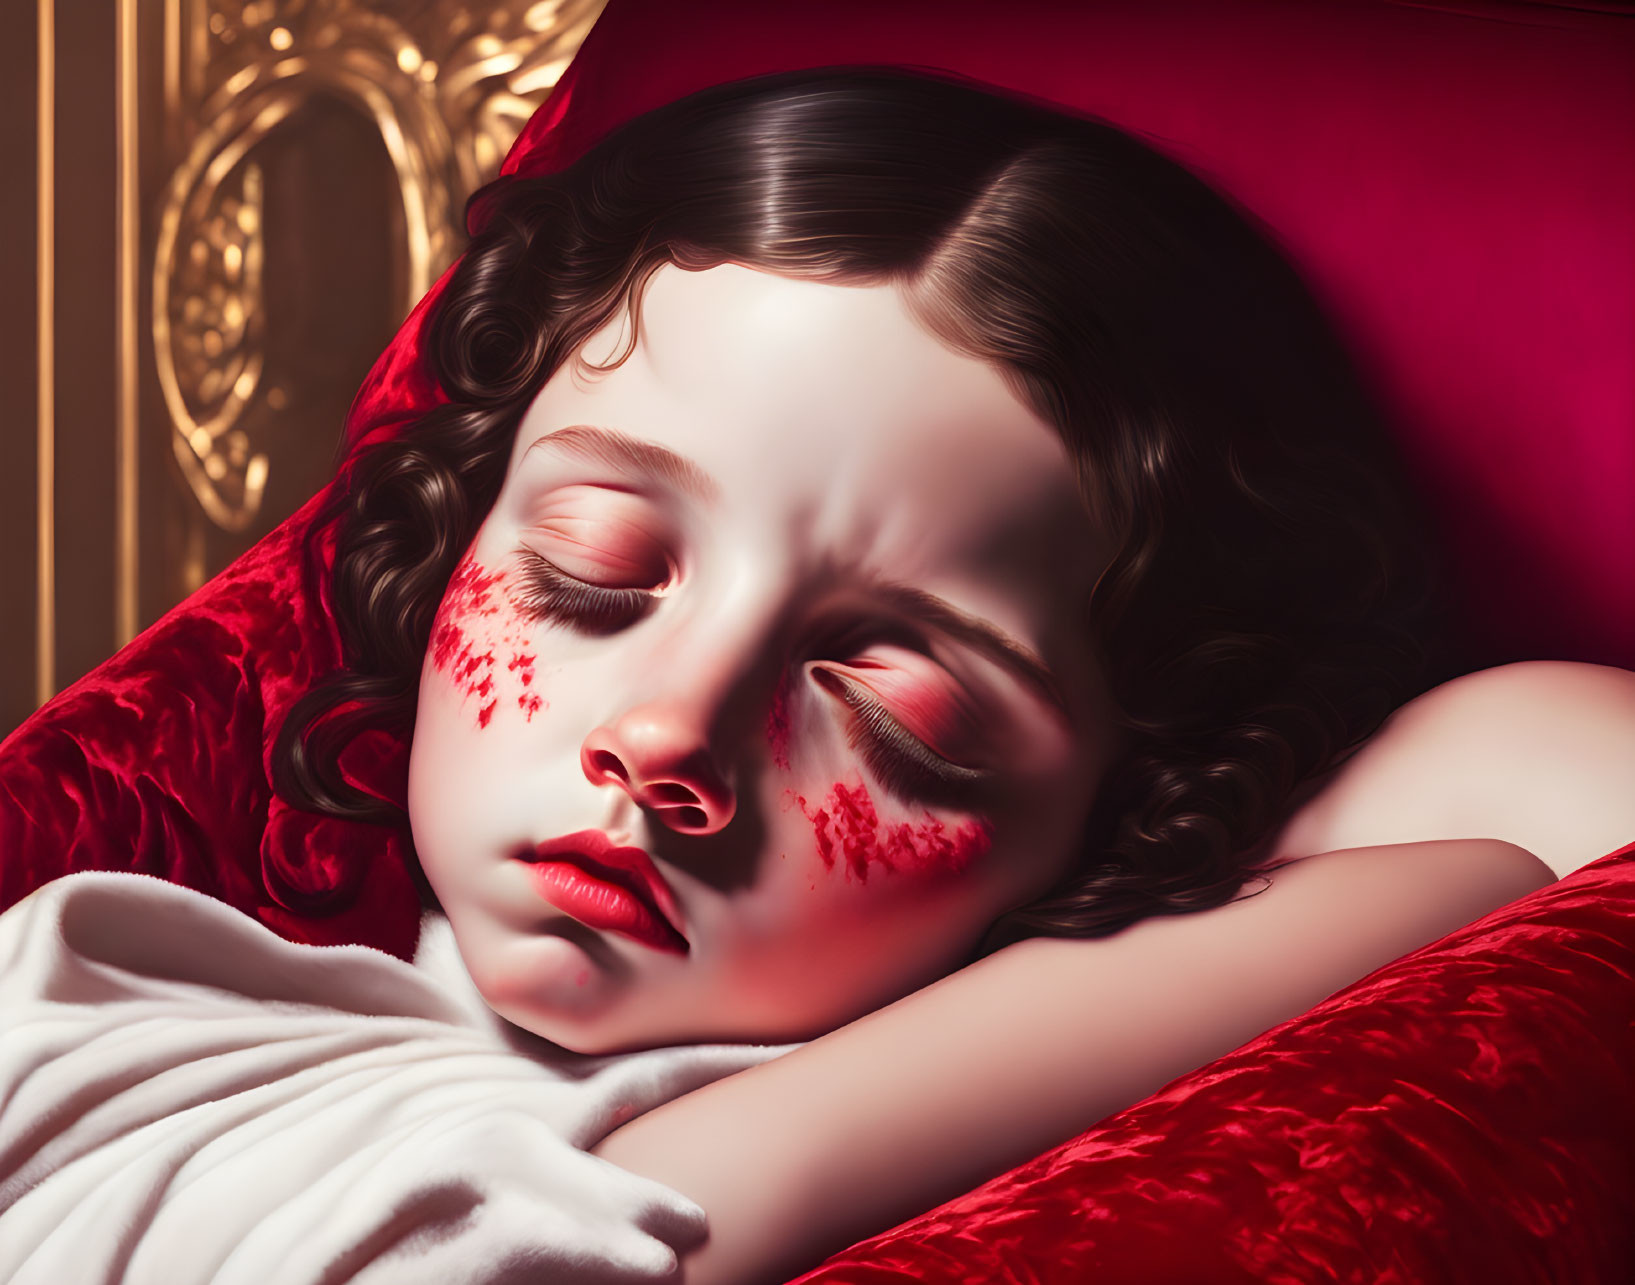 Child on Red Cushioned Surface with Surreal Porcelain-like Complexion